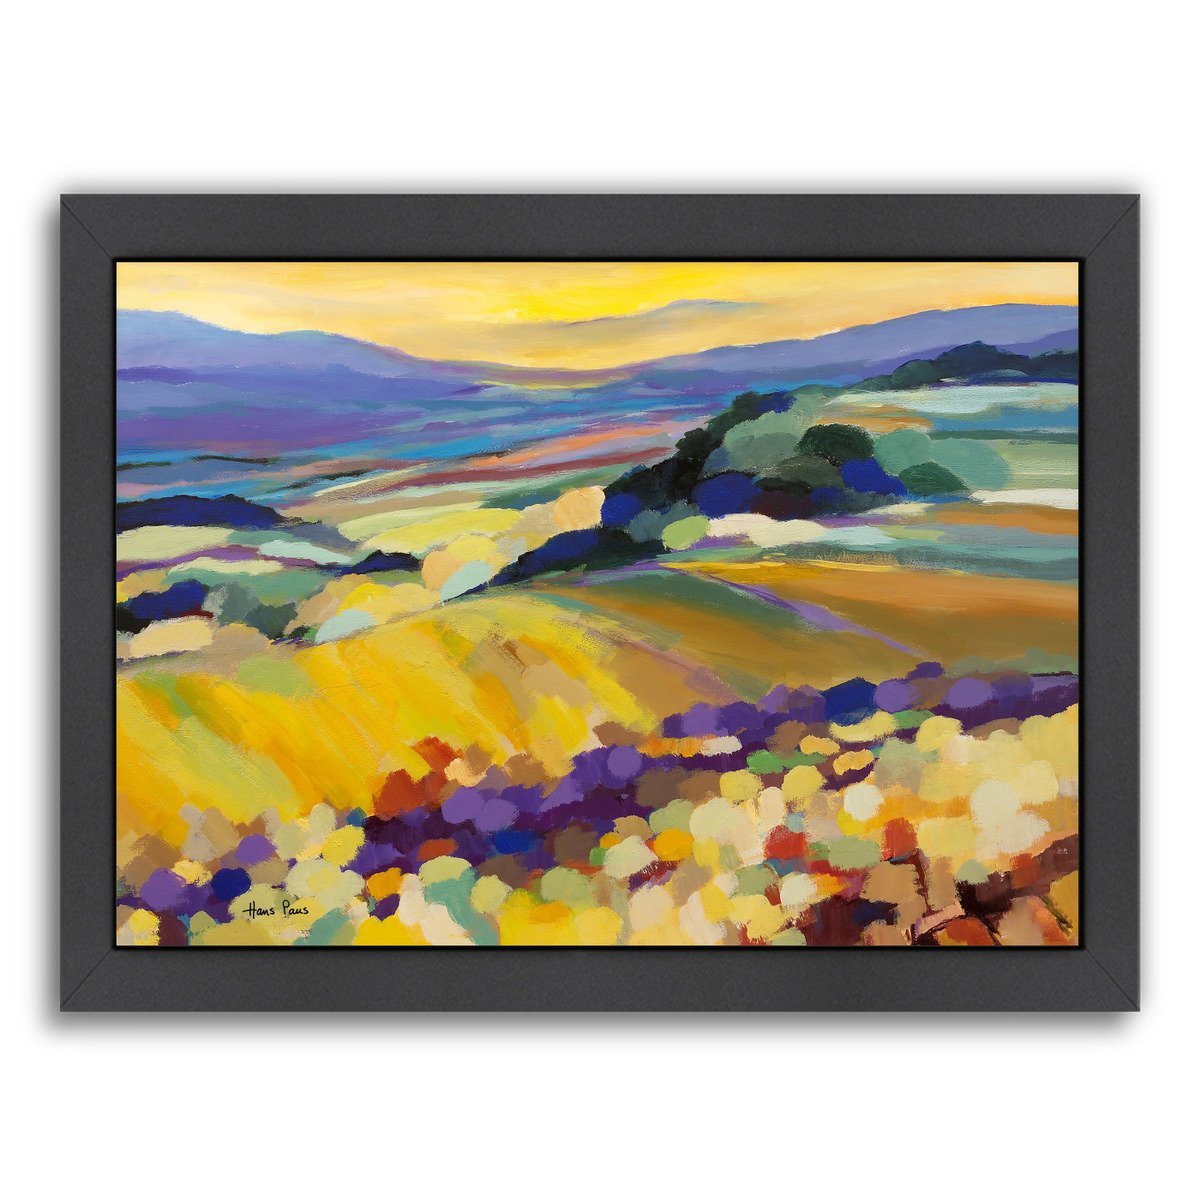 Abstract Landscape 8 By Hans Paus - Black Framed Print - Wall Art - Americanflat